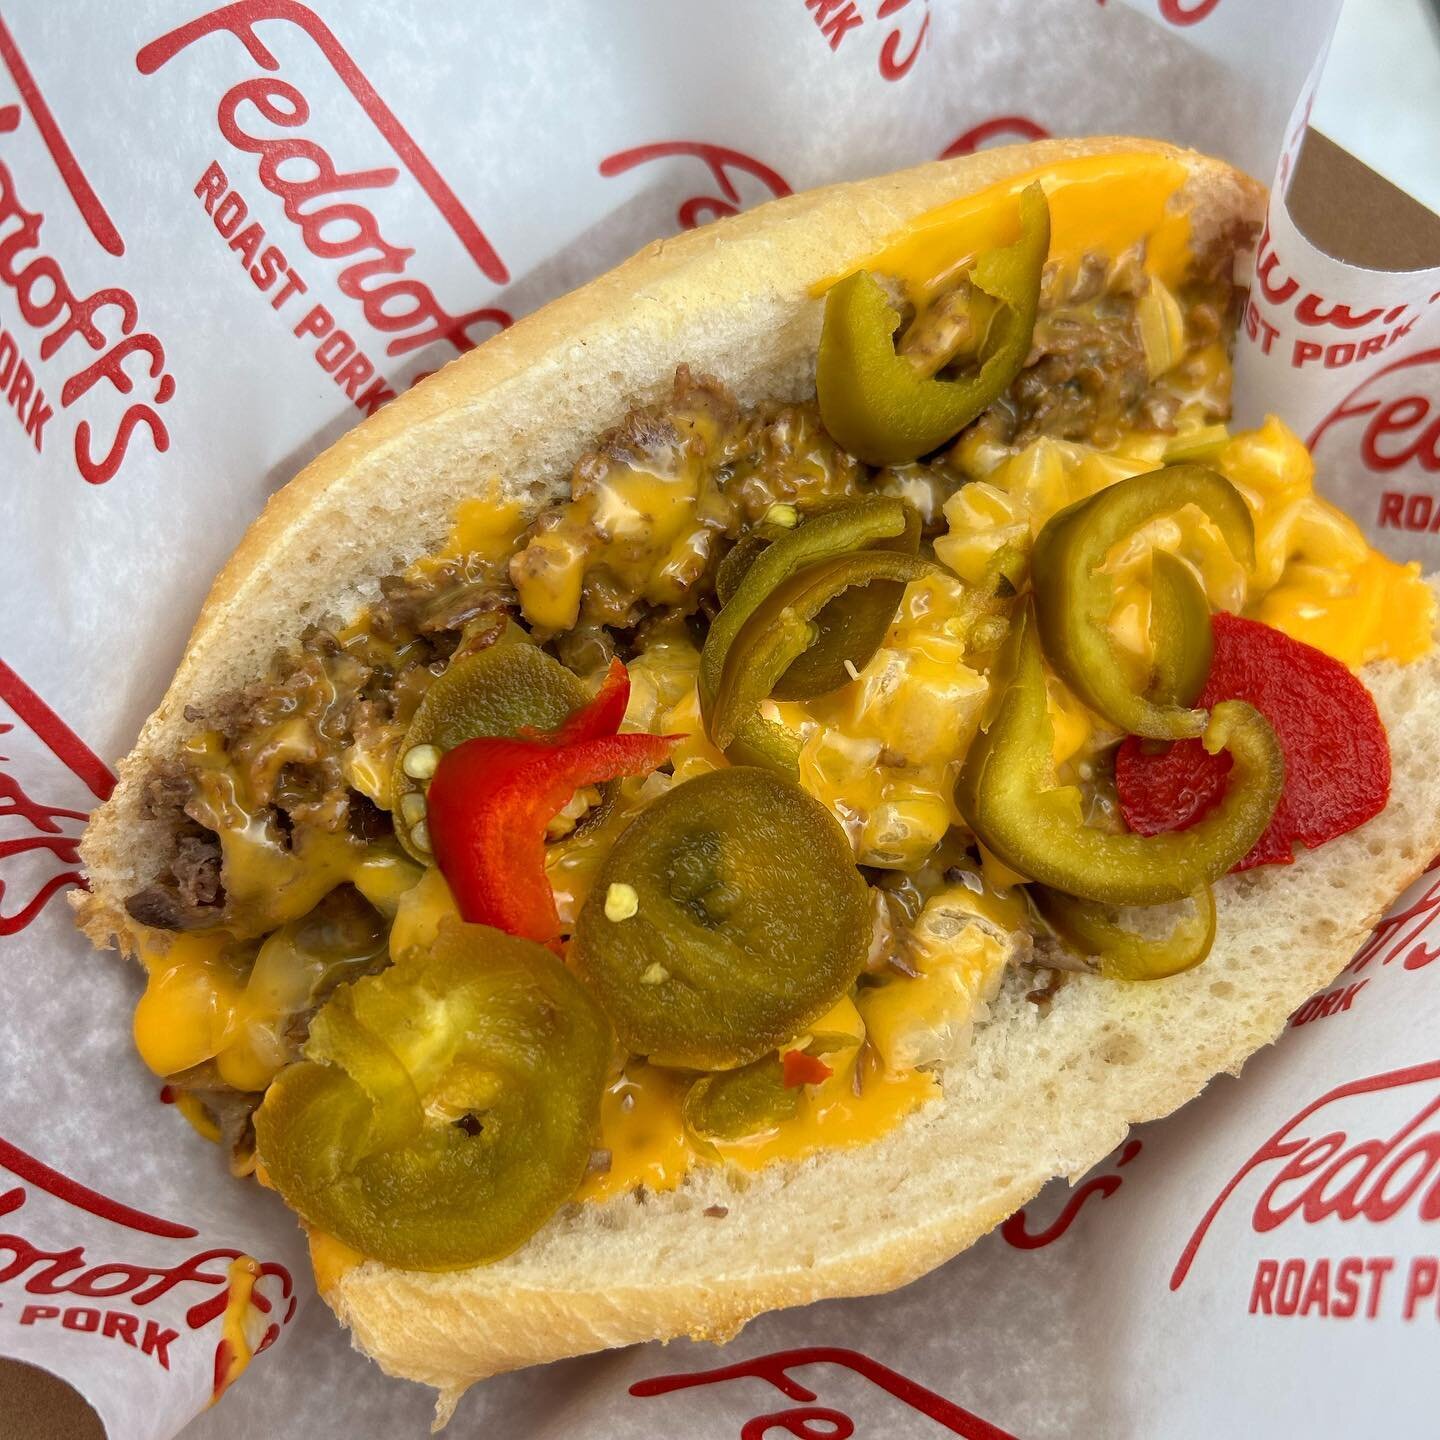 Hot take: a Philly cheesesteak is better with hot peppers
.
.
.
#nyc #smorgasburg #fidi #phillycheesesteak #cheesesteak #cheese #peppers #goodfood #nyceats #nycfood #nycfoodie #nycfat #forkyeah #newforkcity #newyorkcity #newyorkcitylife #nycoutdoordi